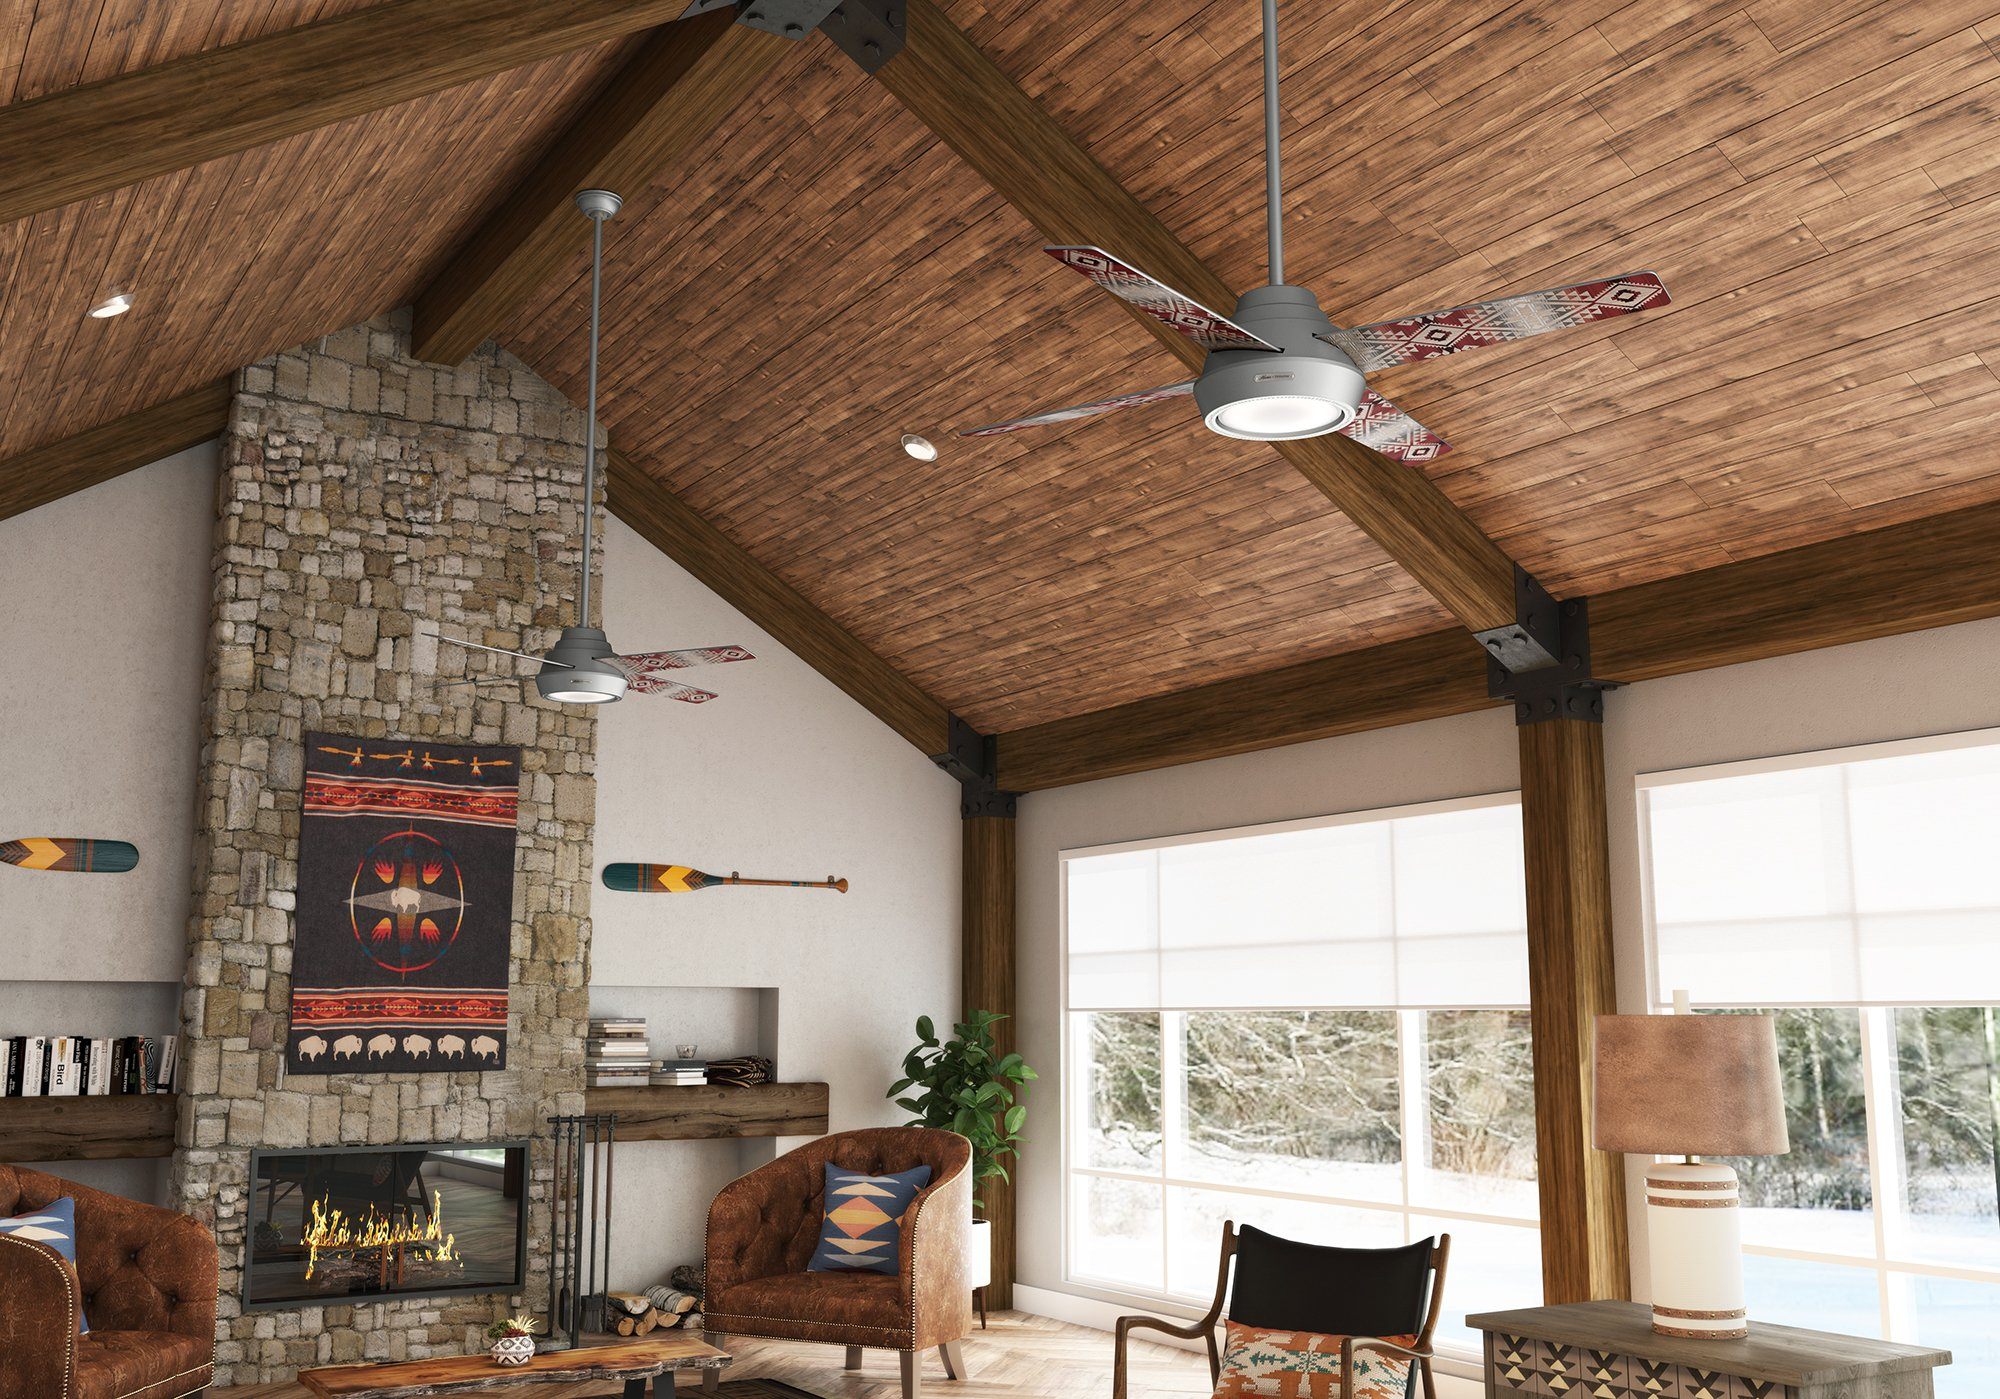 the living room ceiling fans